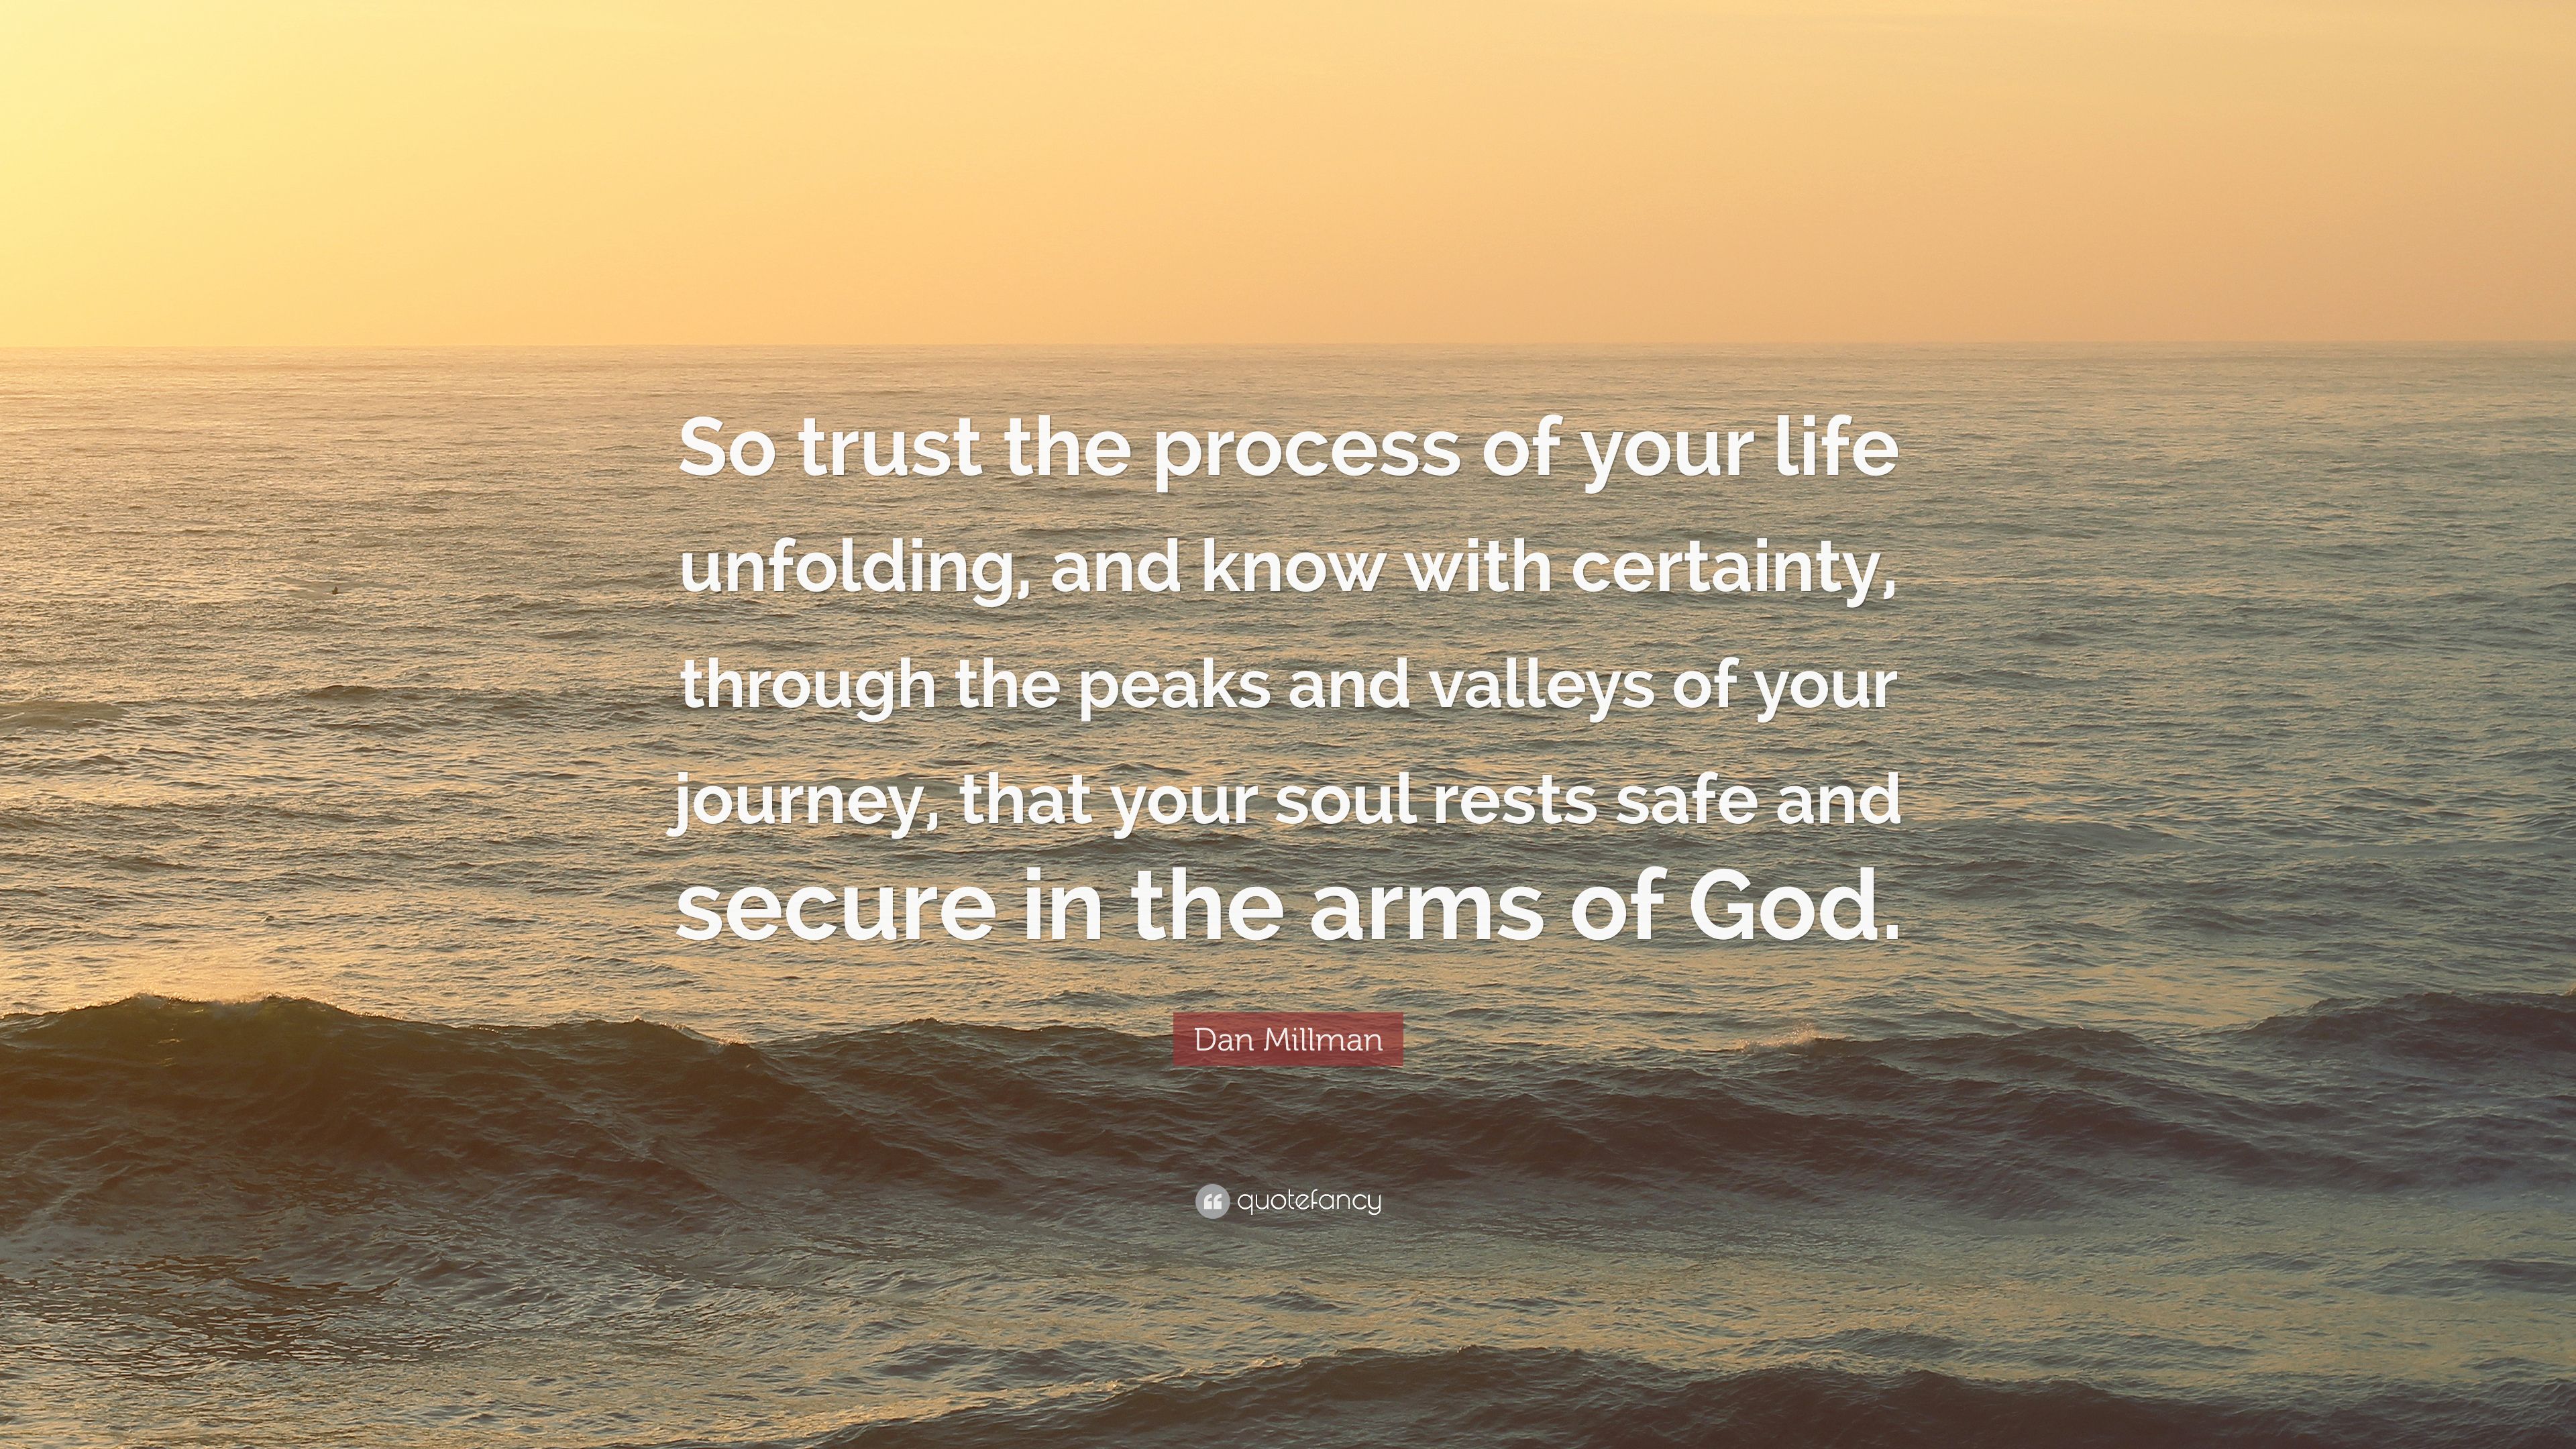 Dan Millman Quote: “So trust the process of your life unfolding, and know with certainty, ks and valleys of your journey, tha.” (12 wallpaper)